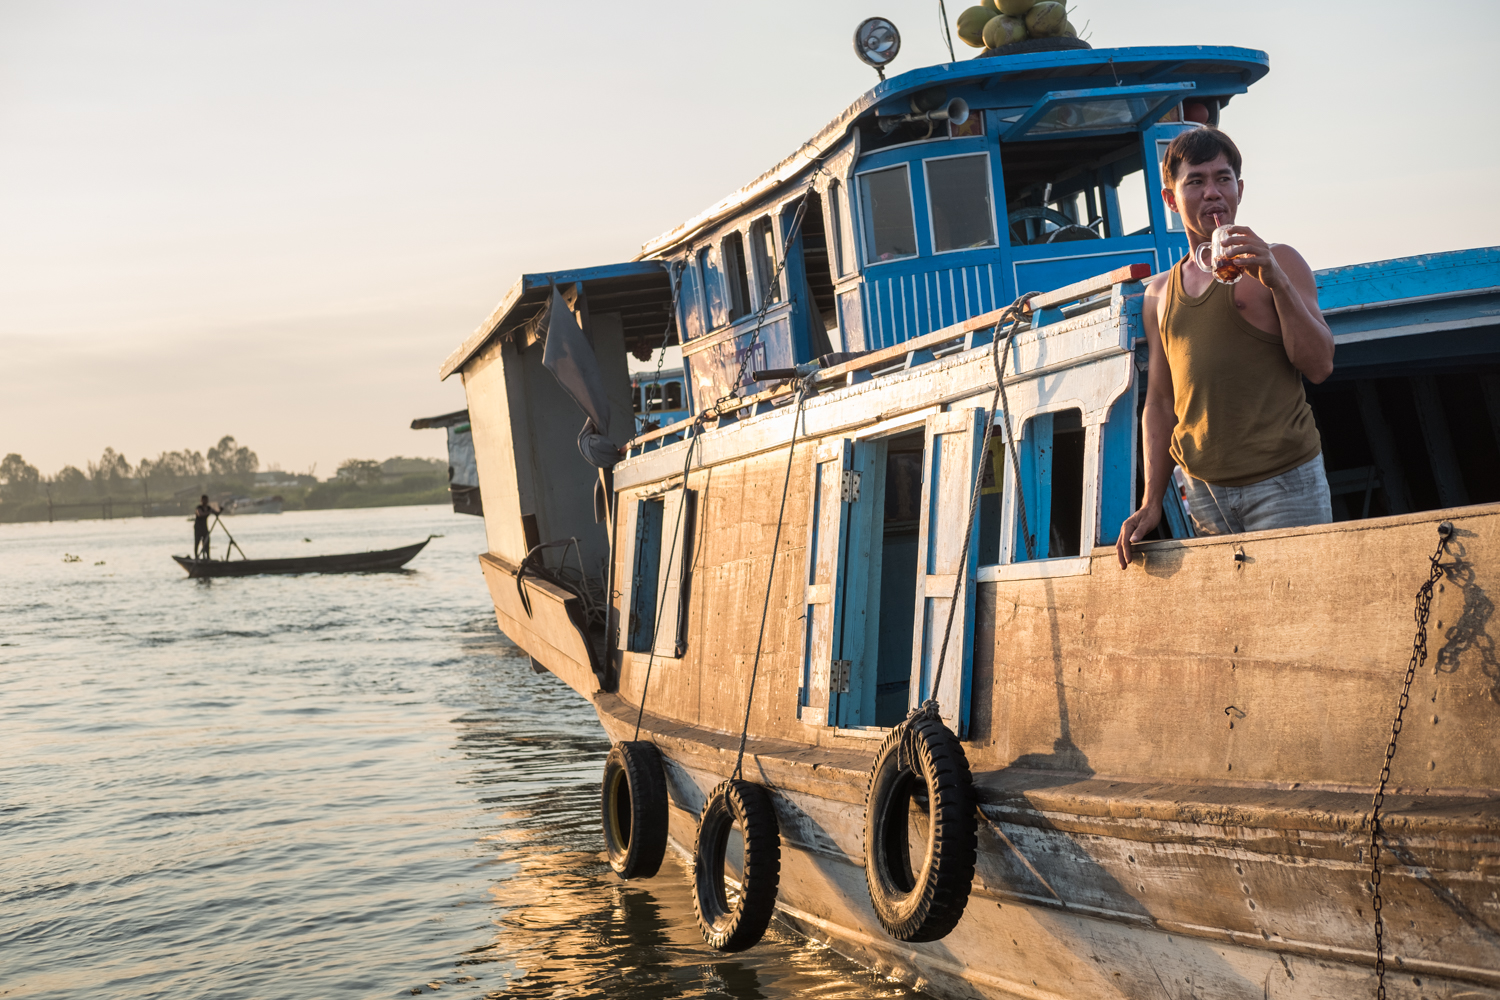  At the floating village in Chau Doc, Vietnam, boats gather in the Bassac River to buy/sell produce and fish. Here, a vendor pauses for an early morning drink. 